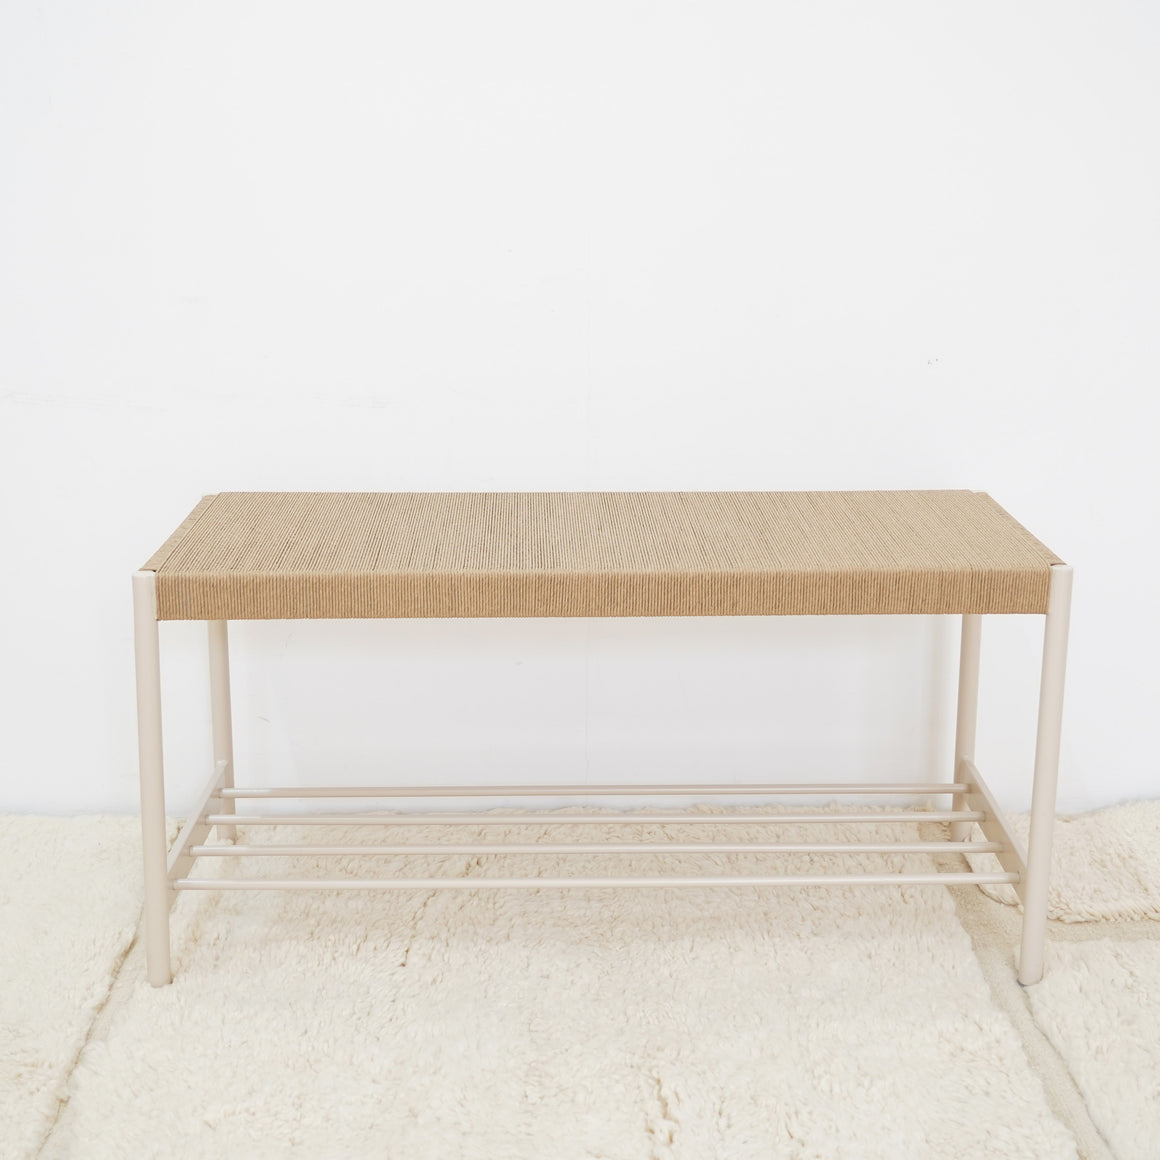 Papyrus Collection - Papyrus Bench